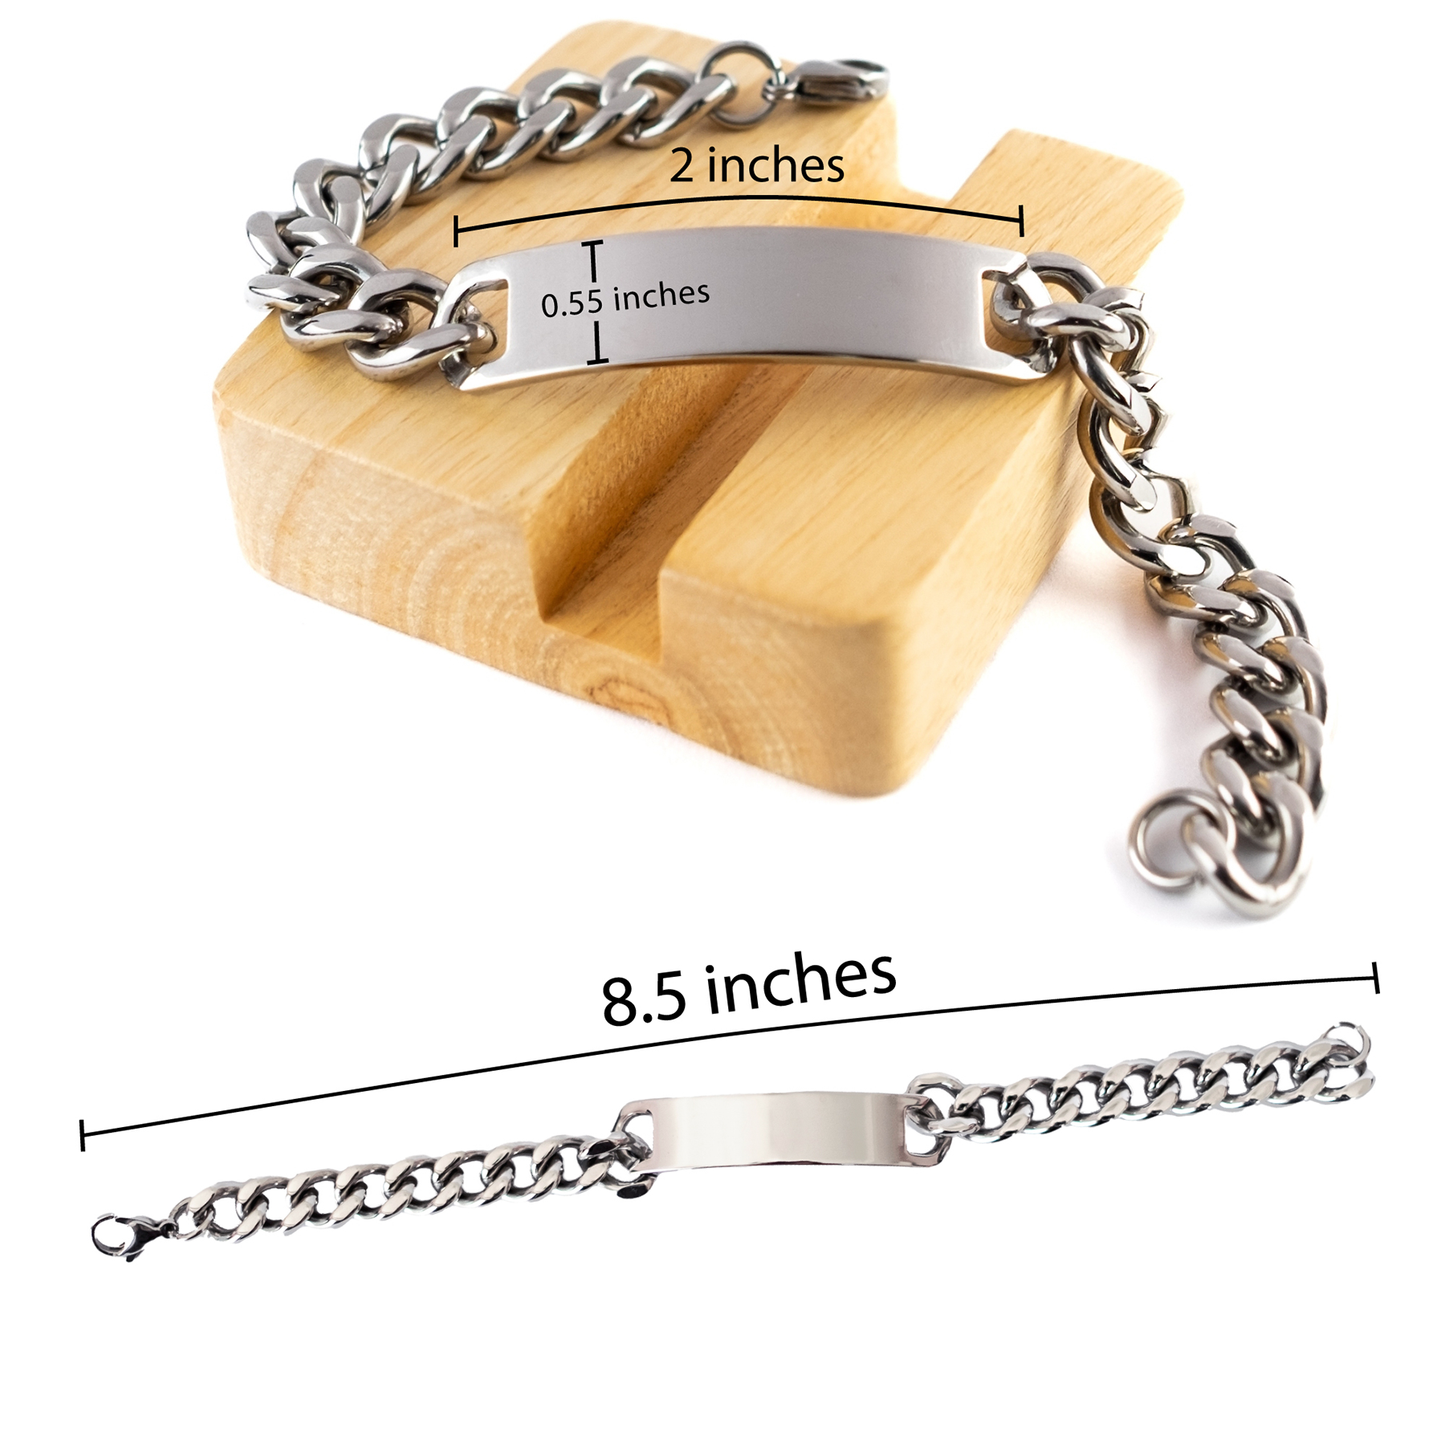 To My Partner Thank You Gifts, You are appreciated more than you know, Appreciation Cuban Chain Stainless Steel Bracelet for Partner, Birthday Unique Gifts for Partner